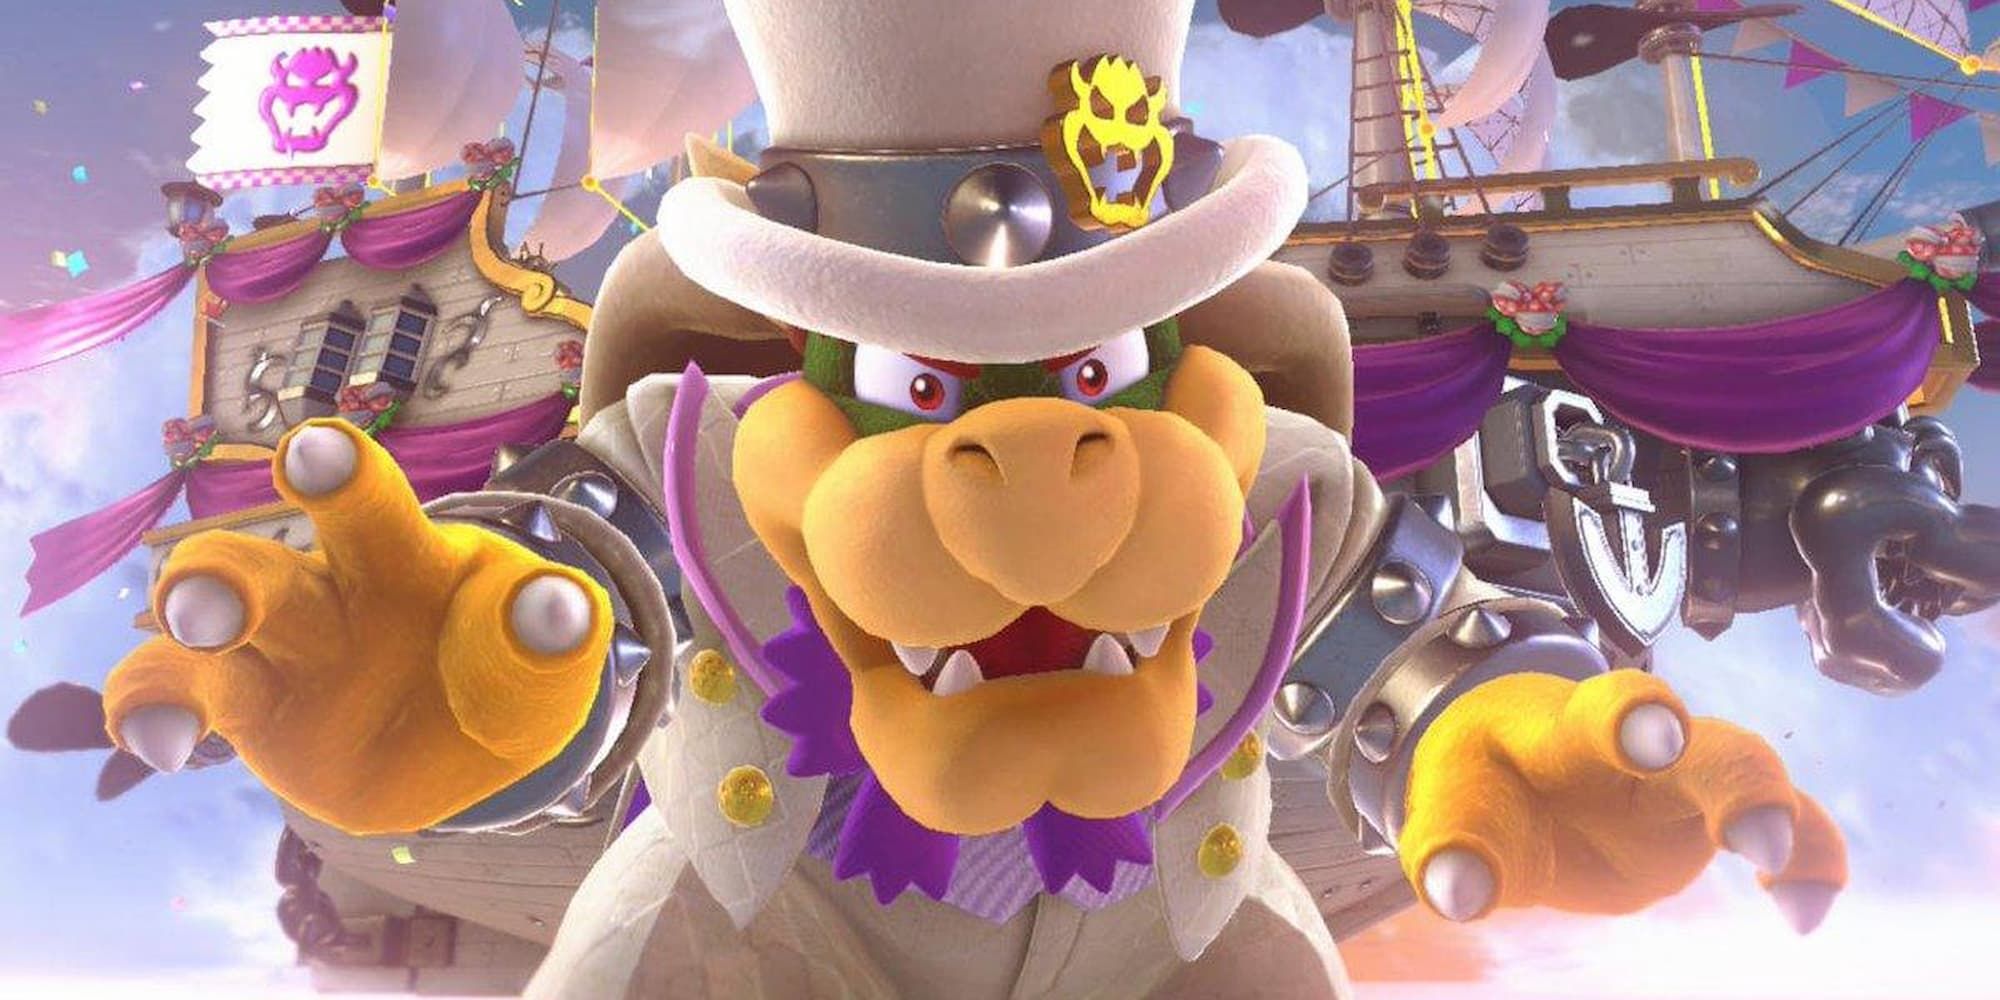 Bowser in front of his airship in Mario Odyssey